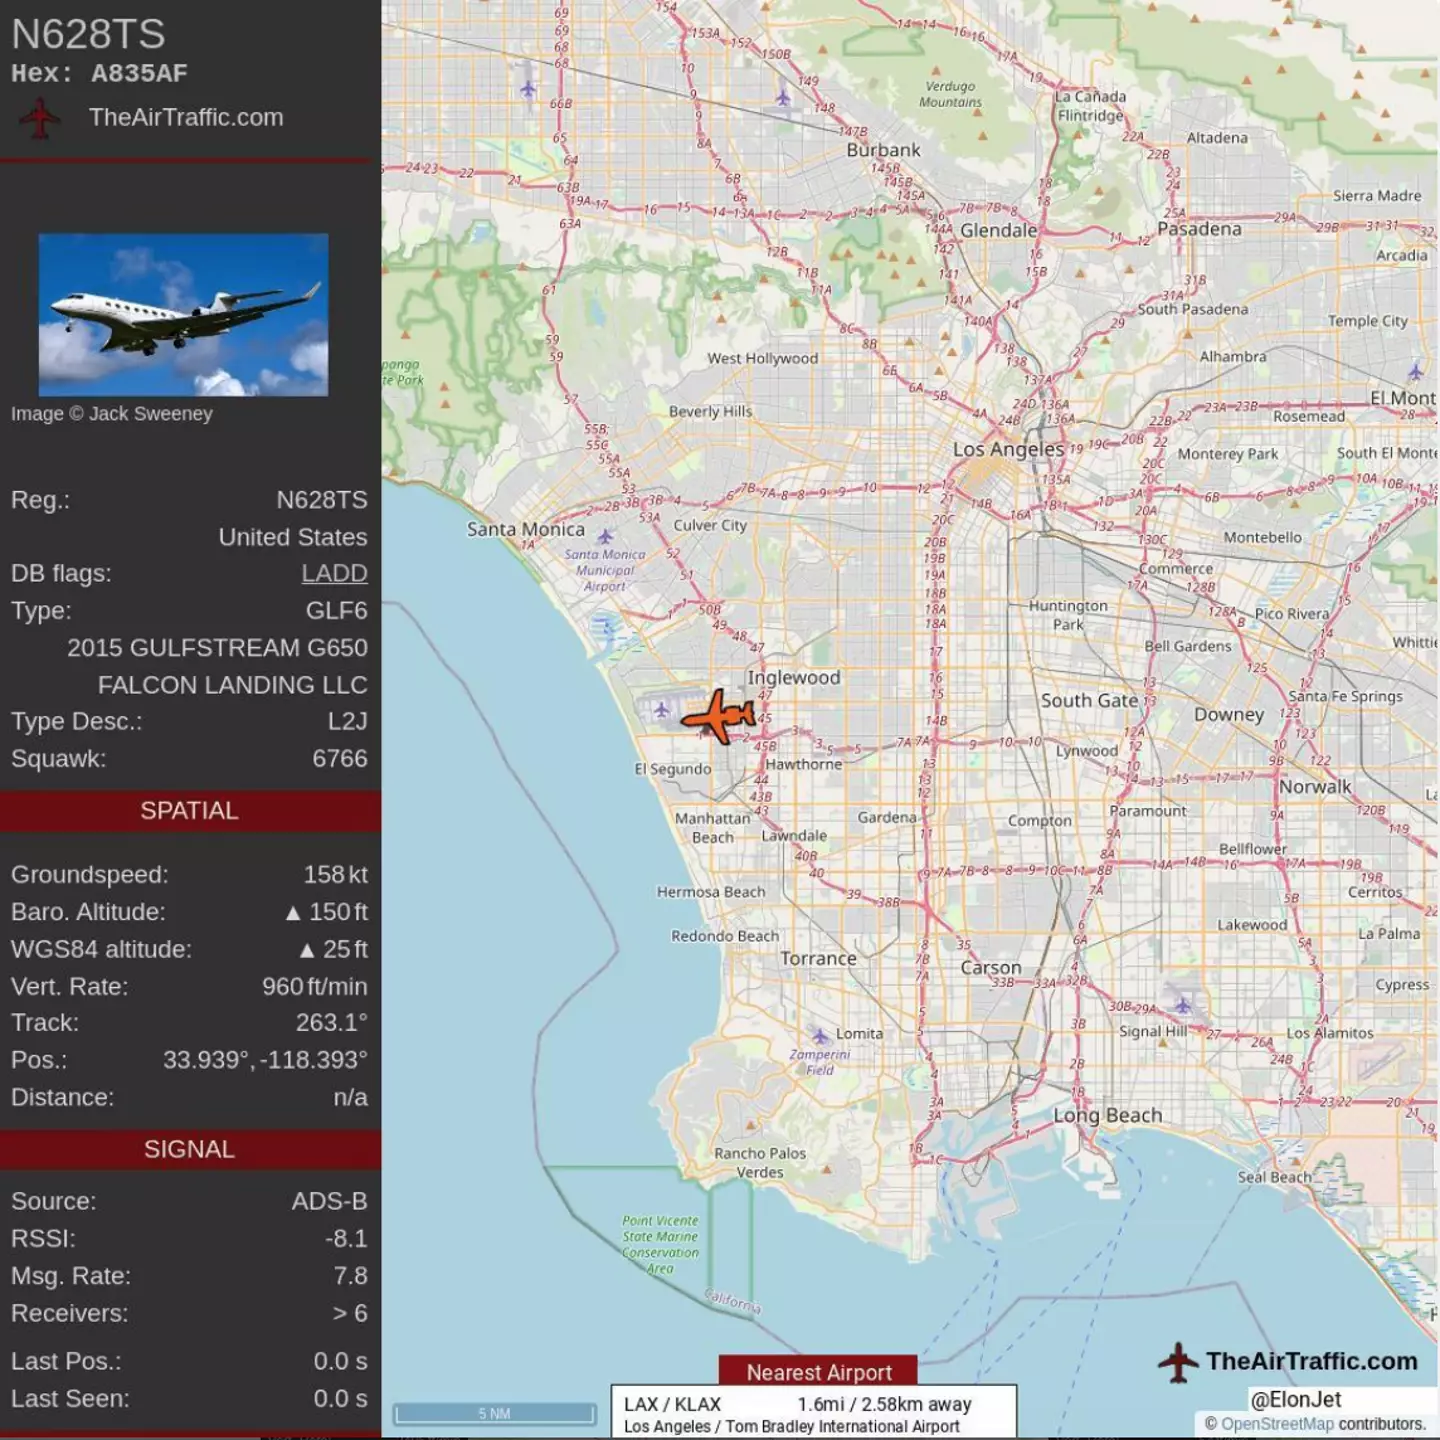 Sweeney also posts his plane-tracking operations on Instagram.